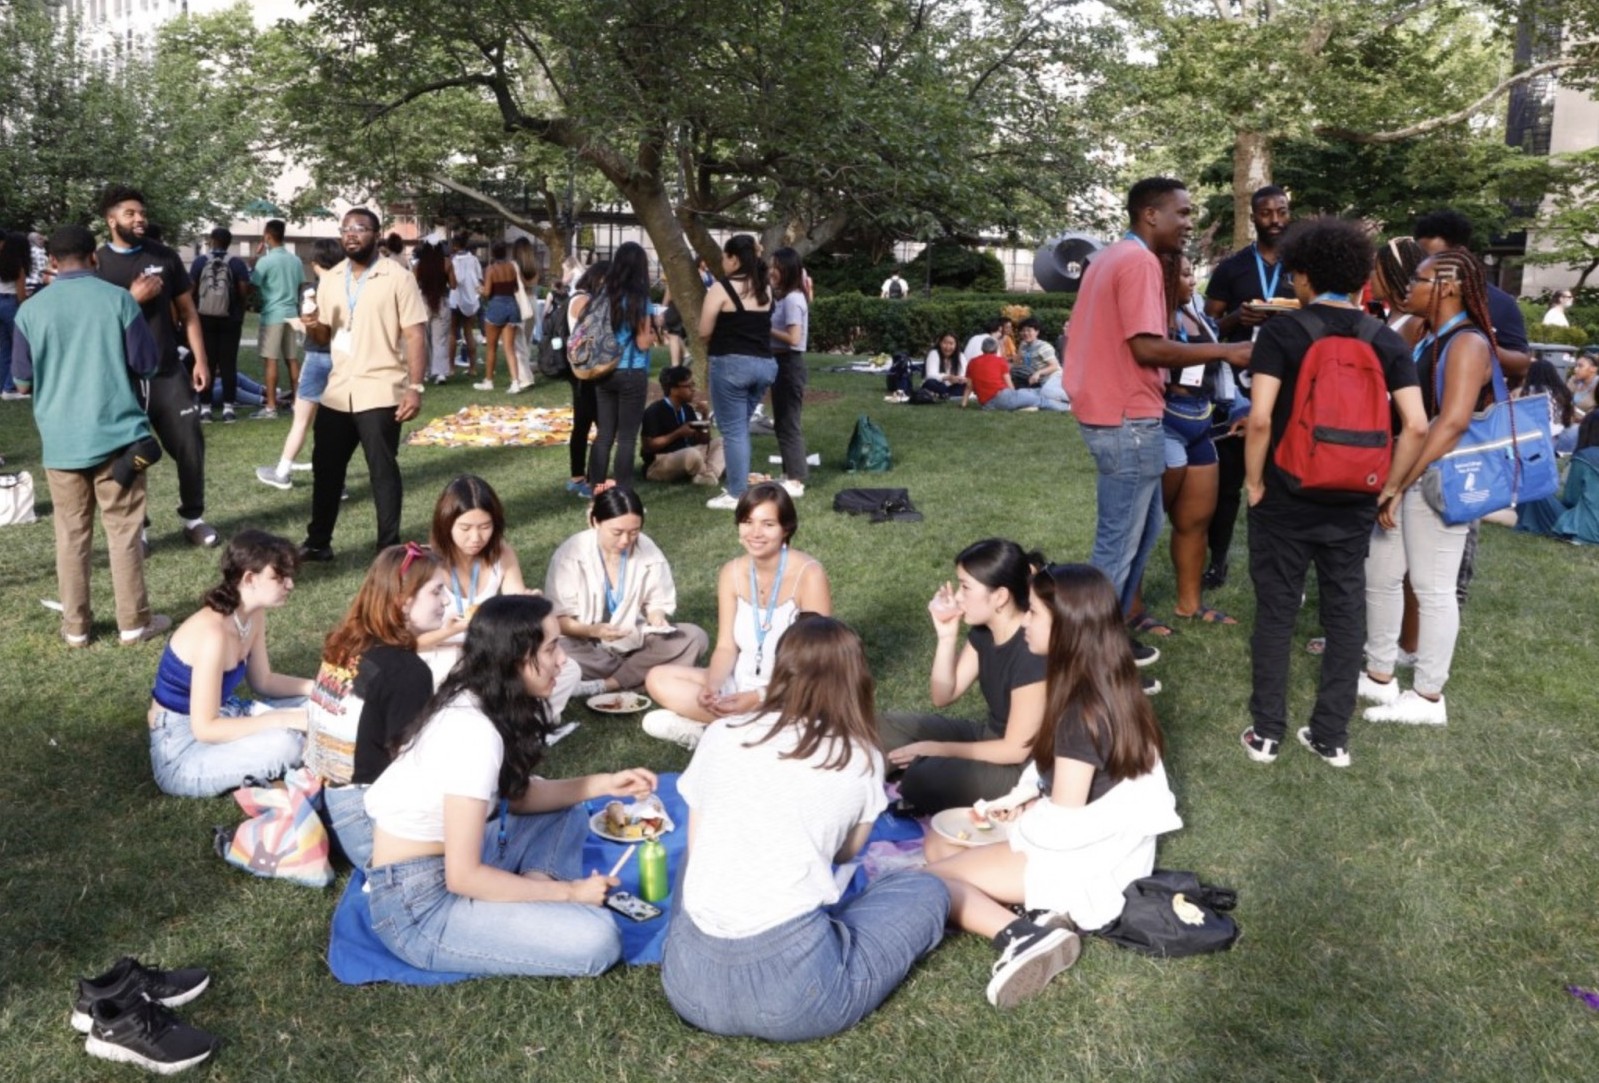 Photo of several students seated in a circle on the grass; in the background, small groups of students stand talking